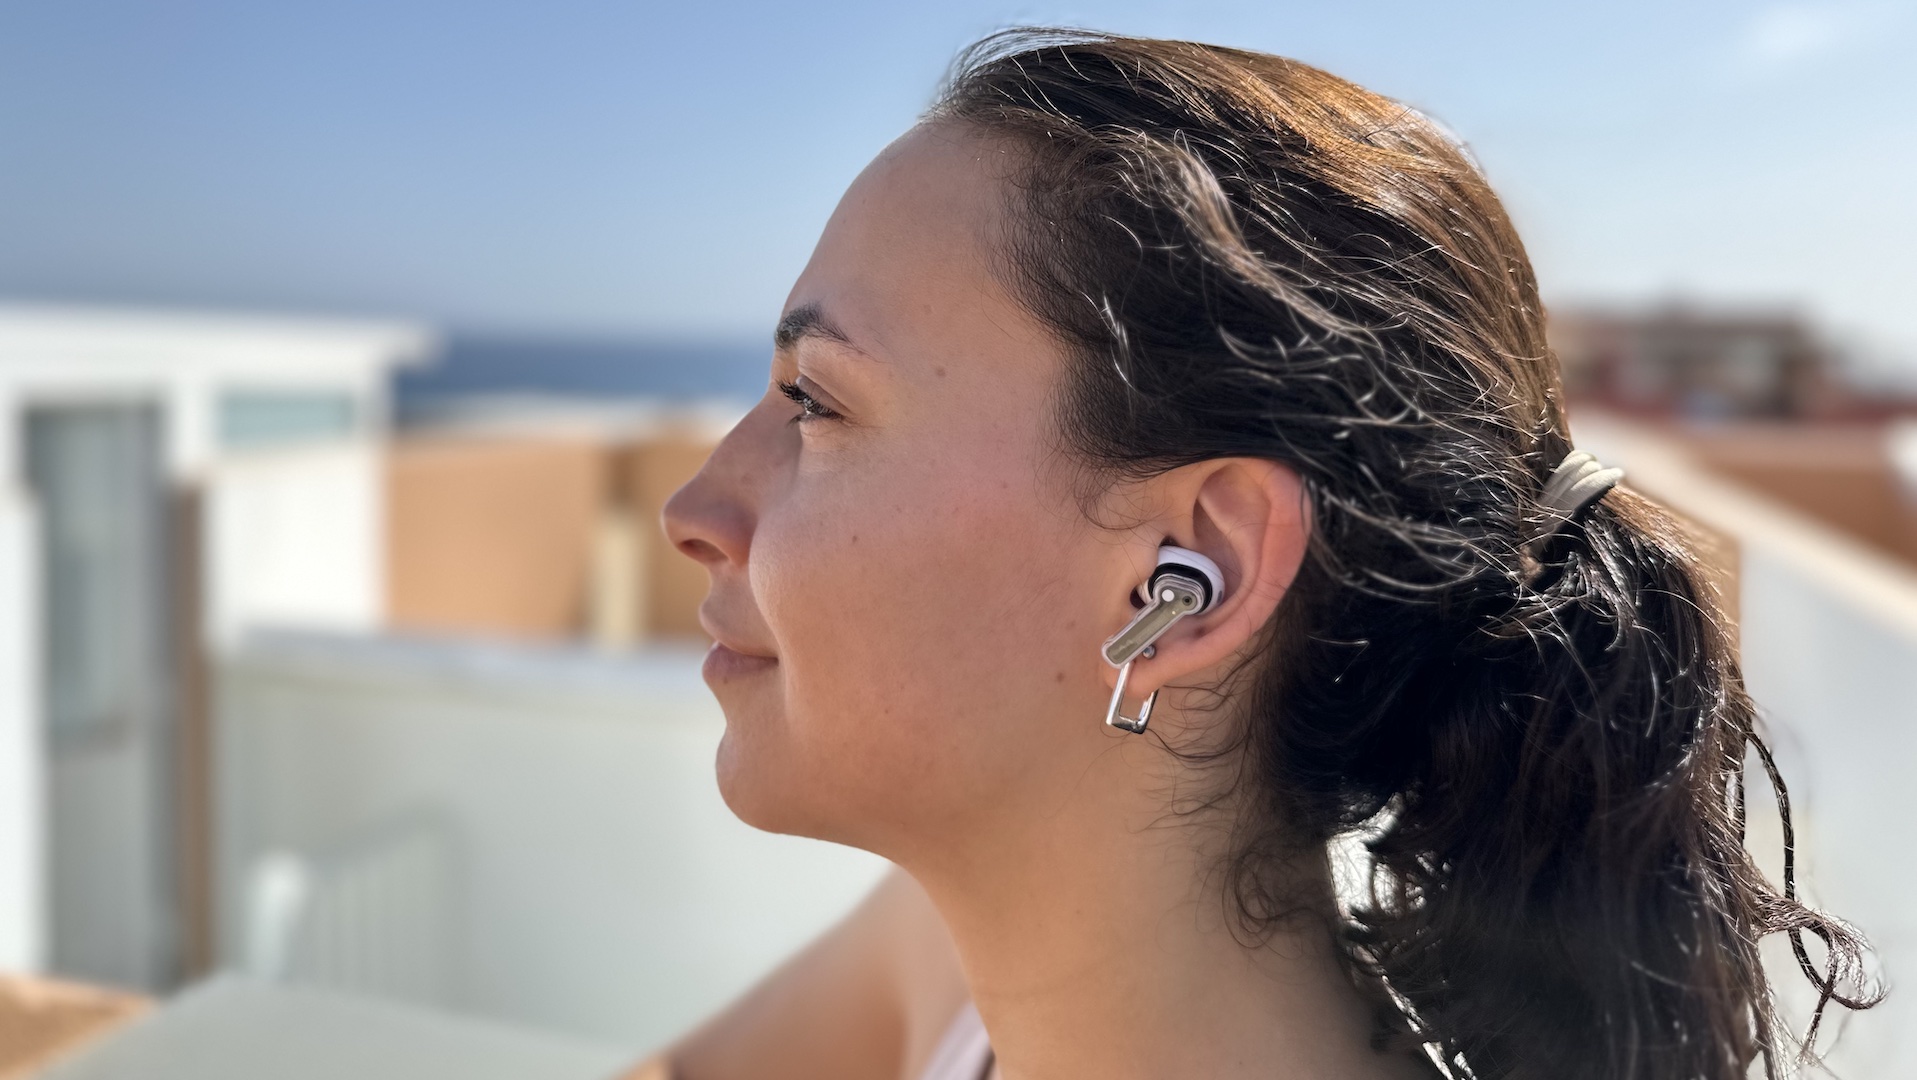 Nothing Ear Stick review: Earbuds, but make it fashion